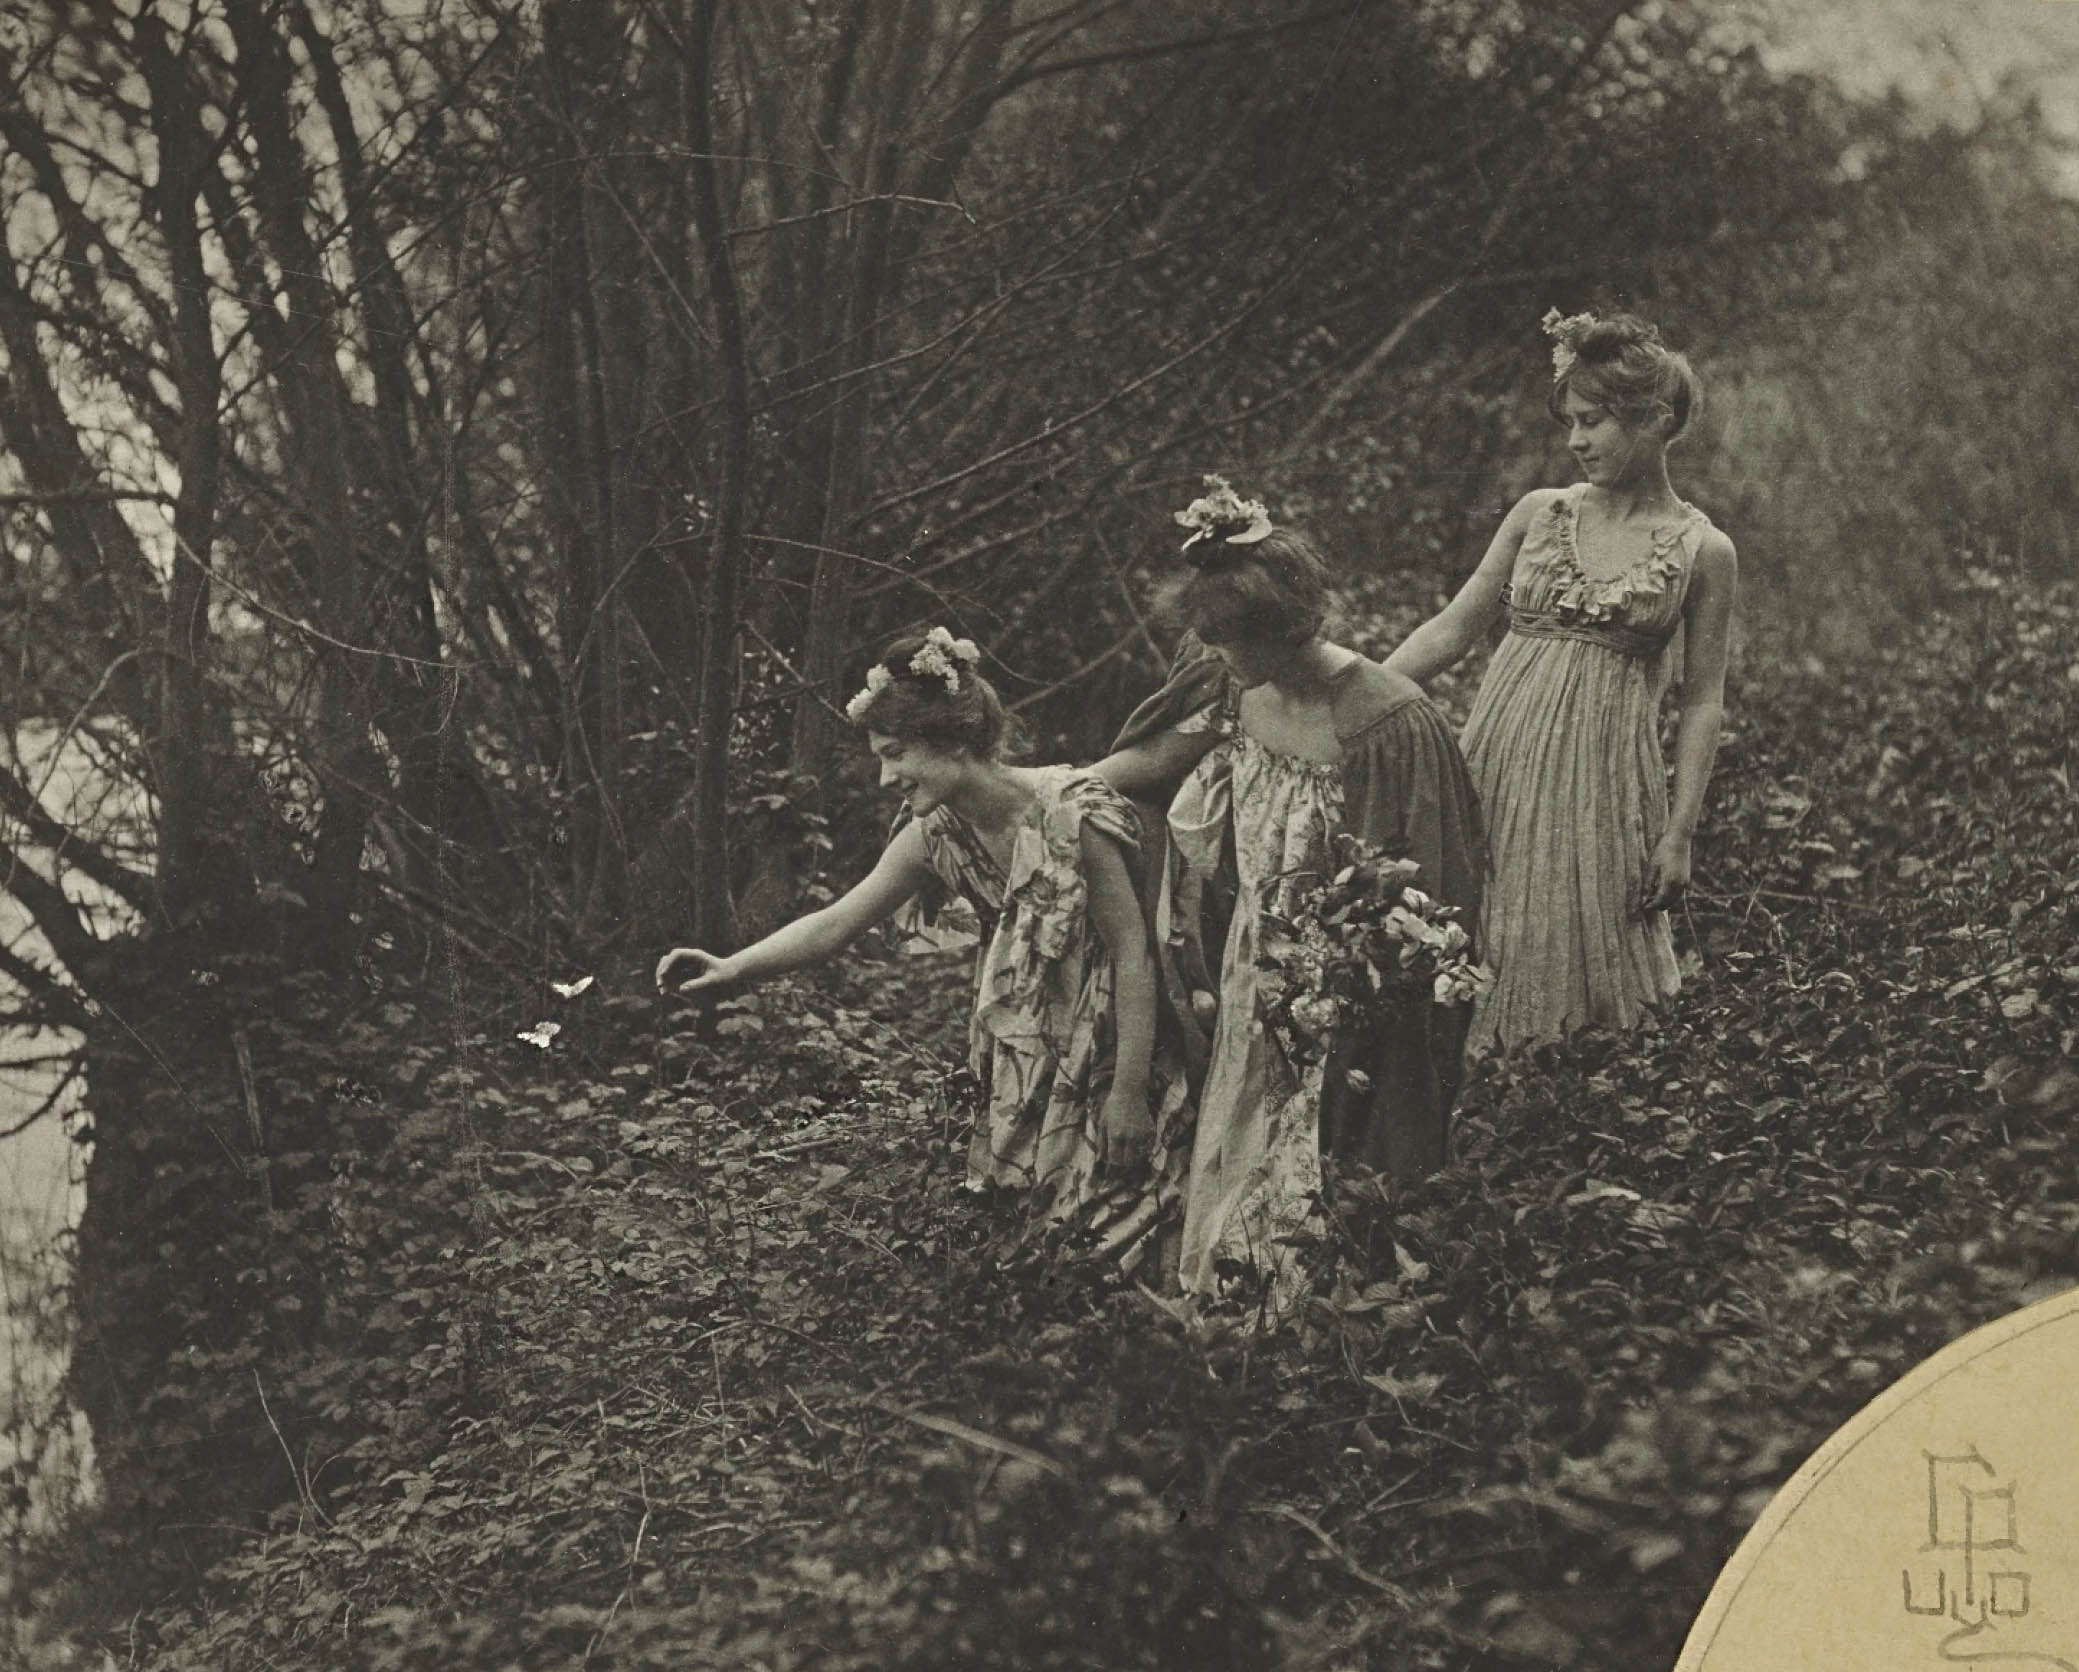 Émile Joachim Constant Puyo :: 'Les Papillons Blancs', 1900. Platinum print with trimmed decorative corners, mounted to cream paper, the photographer's stylized signature in ink and his blindstamp on the mount. | src Sotheby's [detail]